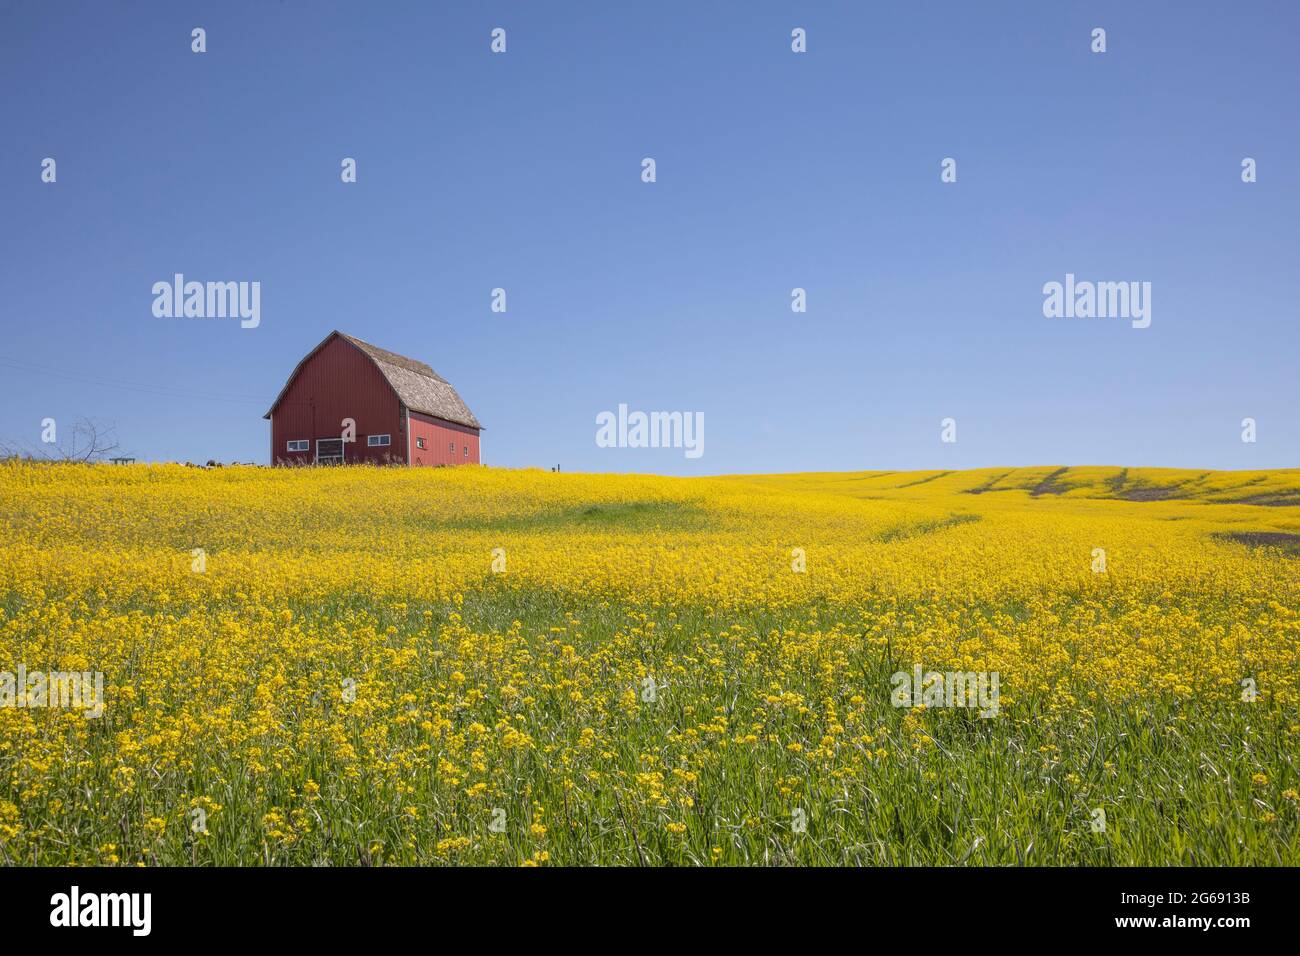 Red barn in field of canola, Washington state. Stock Photo